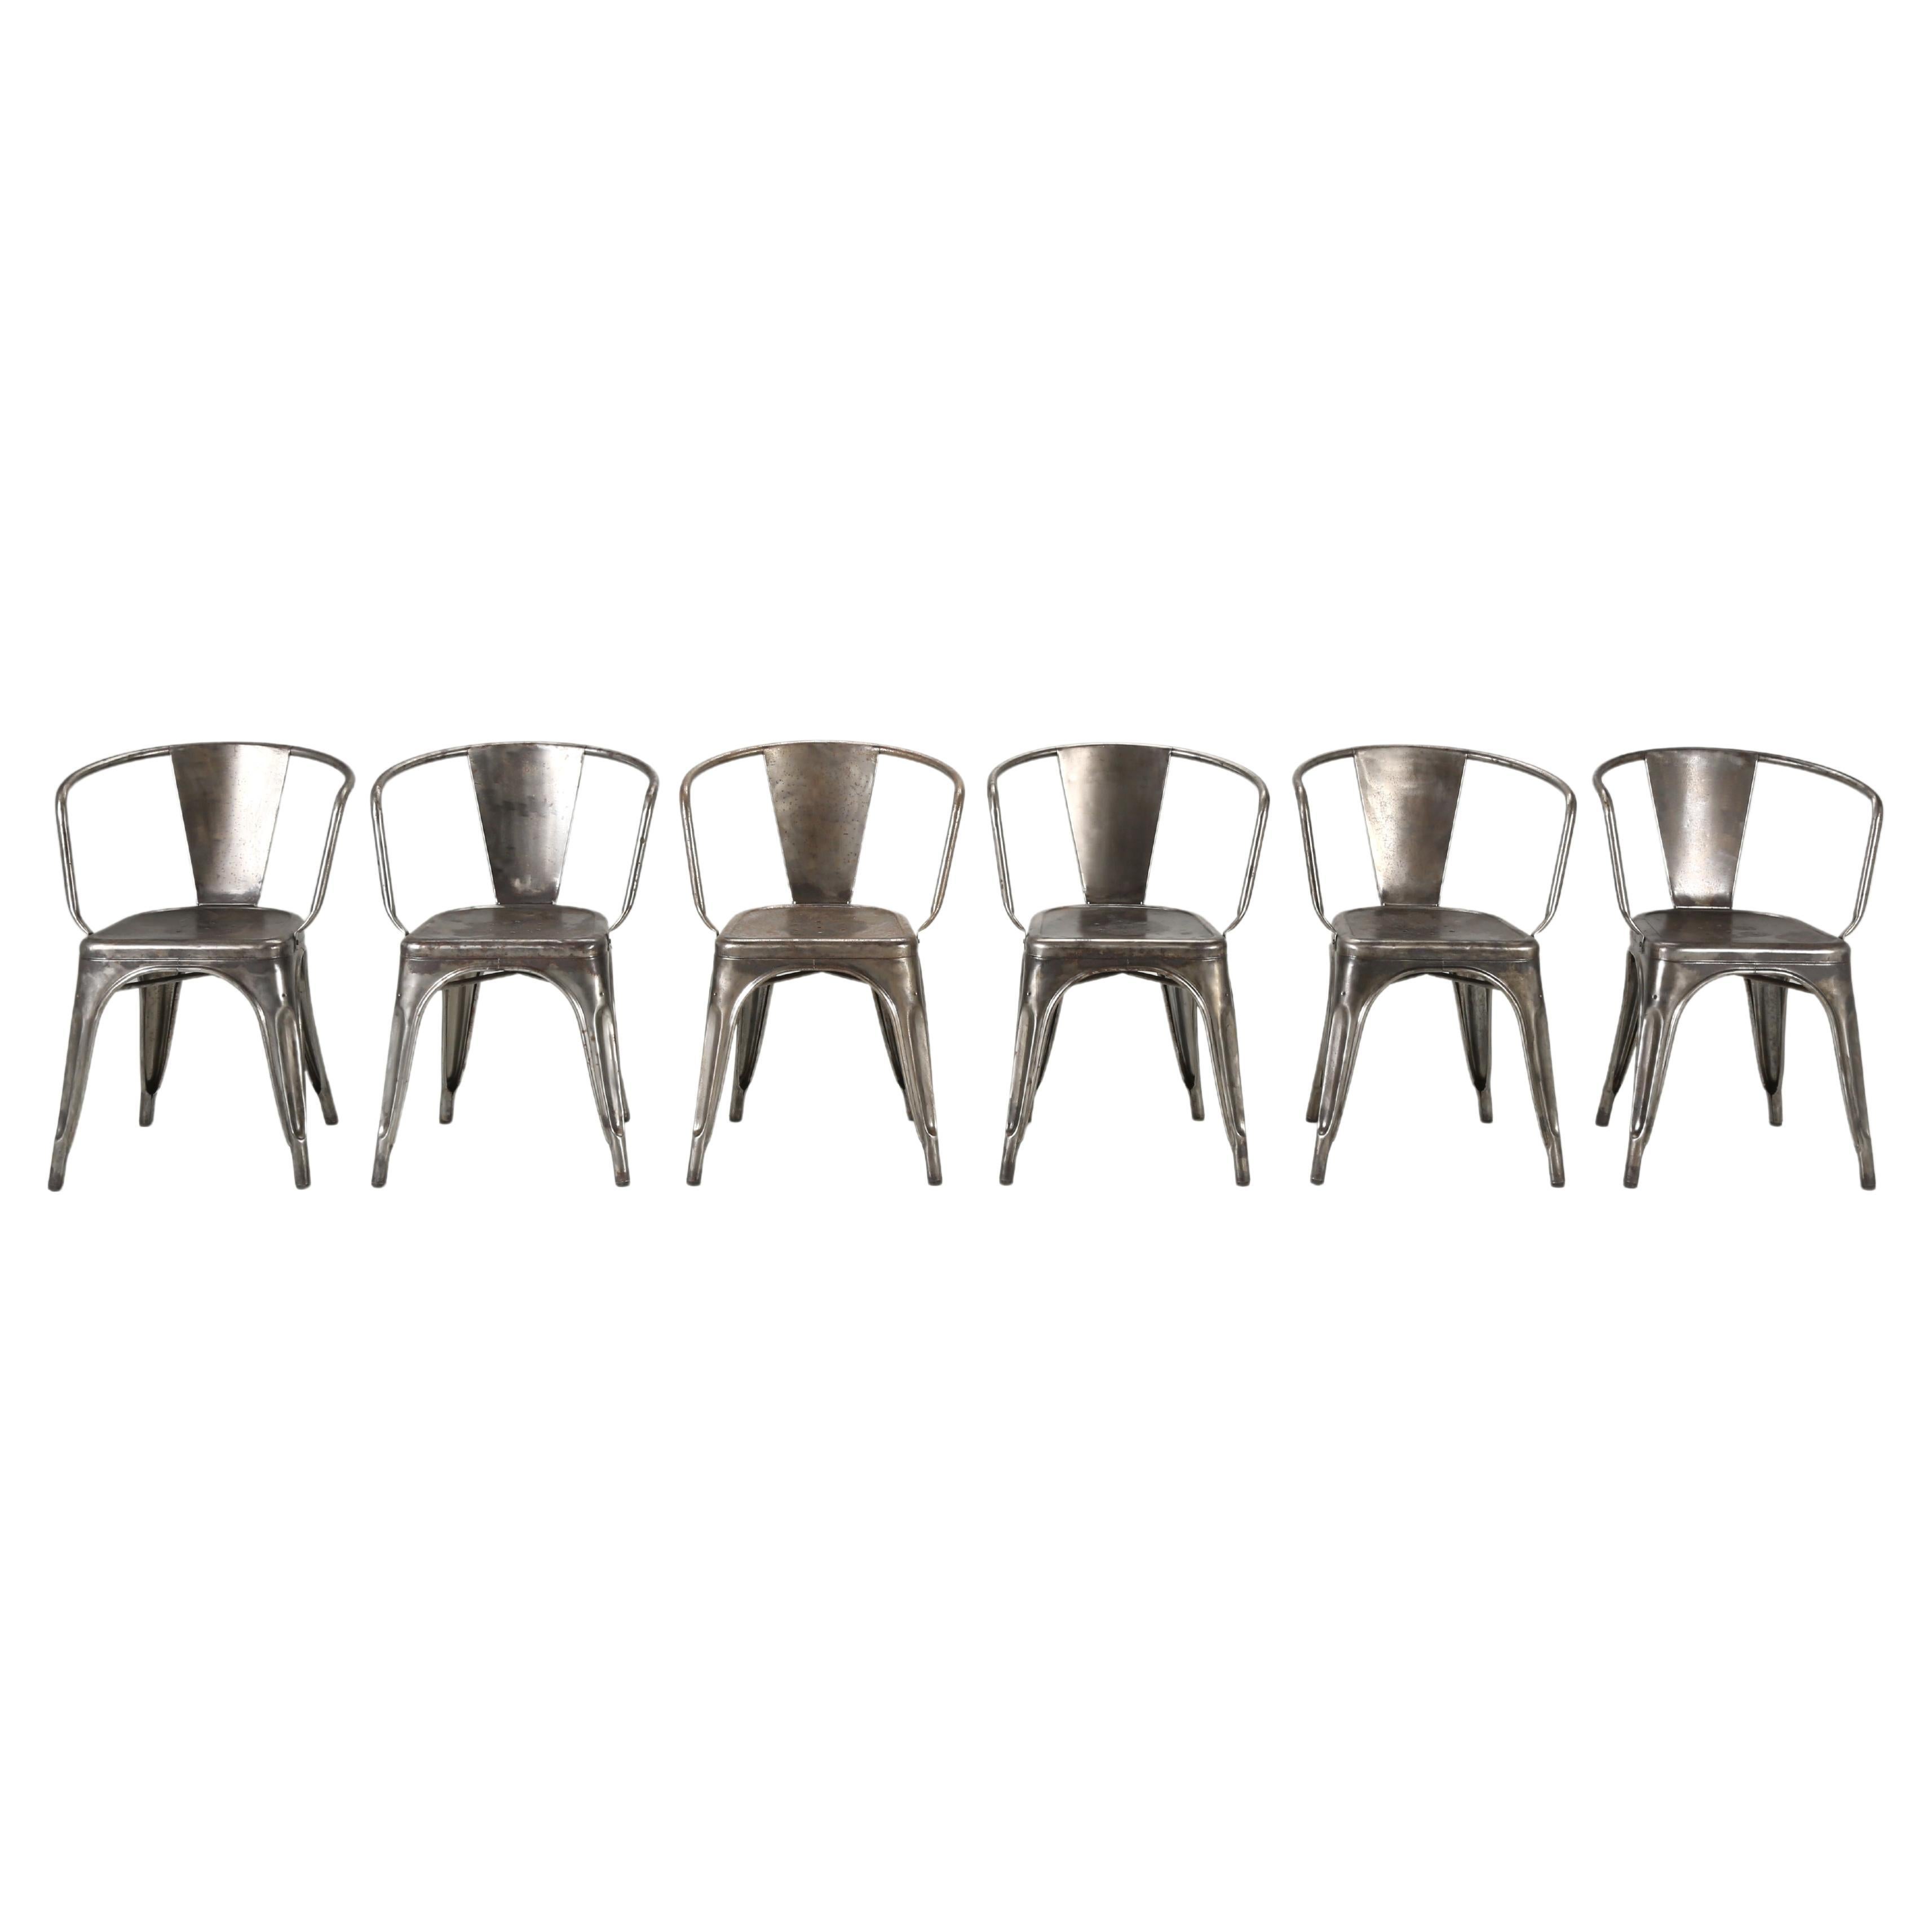 Tolix Stacking Chairs Raw Steel '40' Available, or 100's in Original Paint